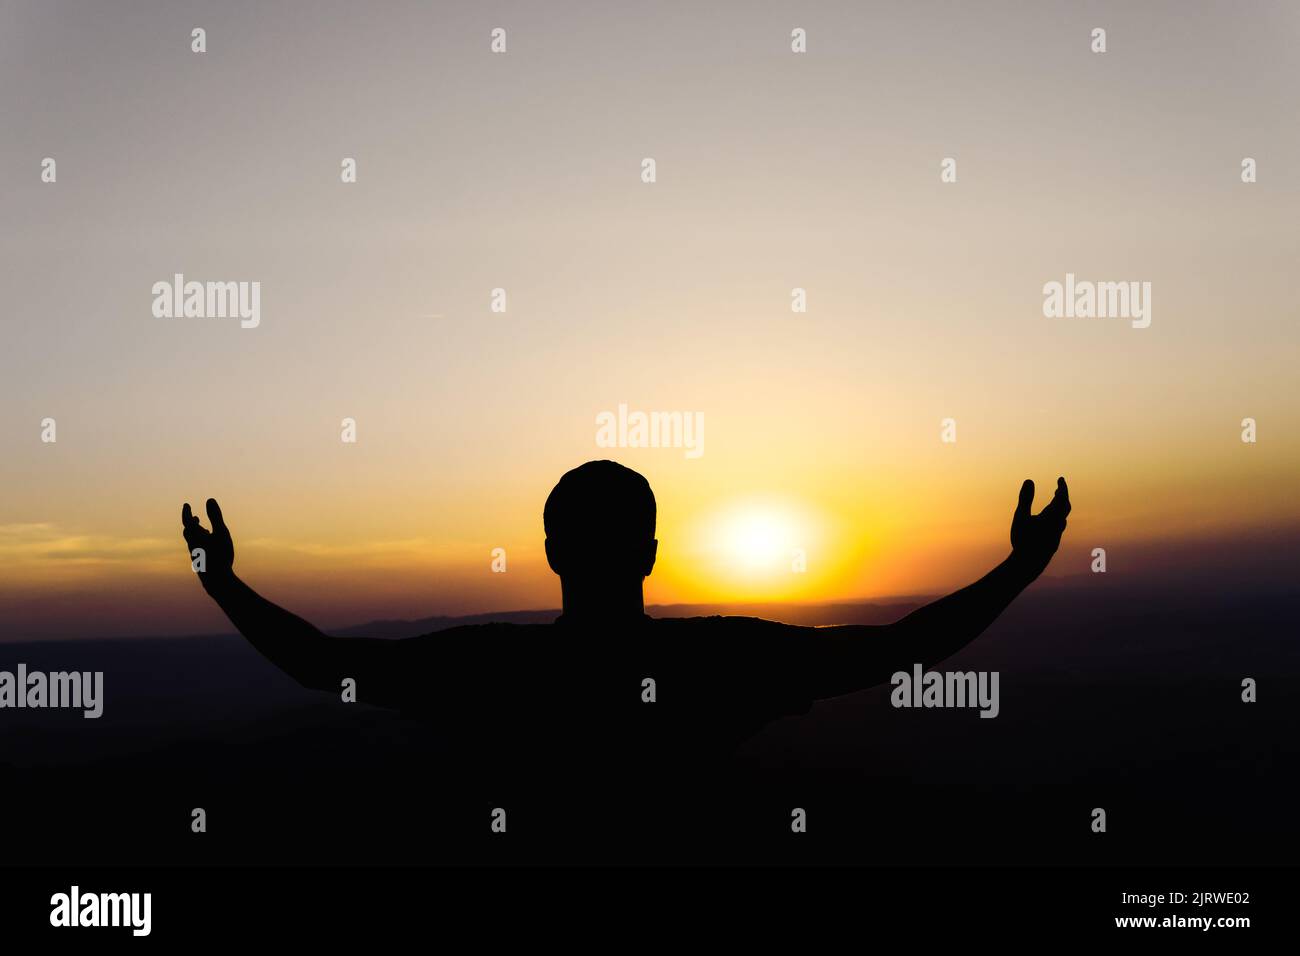 Sunset with a silhouette of a young man with a cap in an attitude of gratitude to the sun, with a background of mountains. Stock Photo